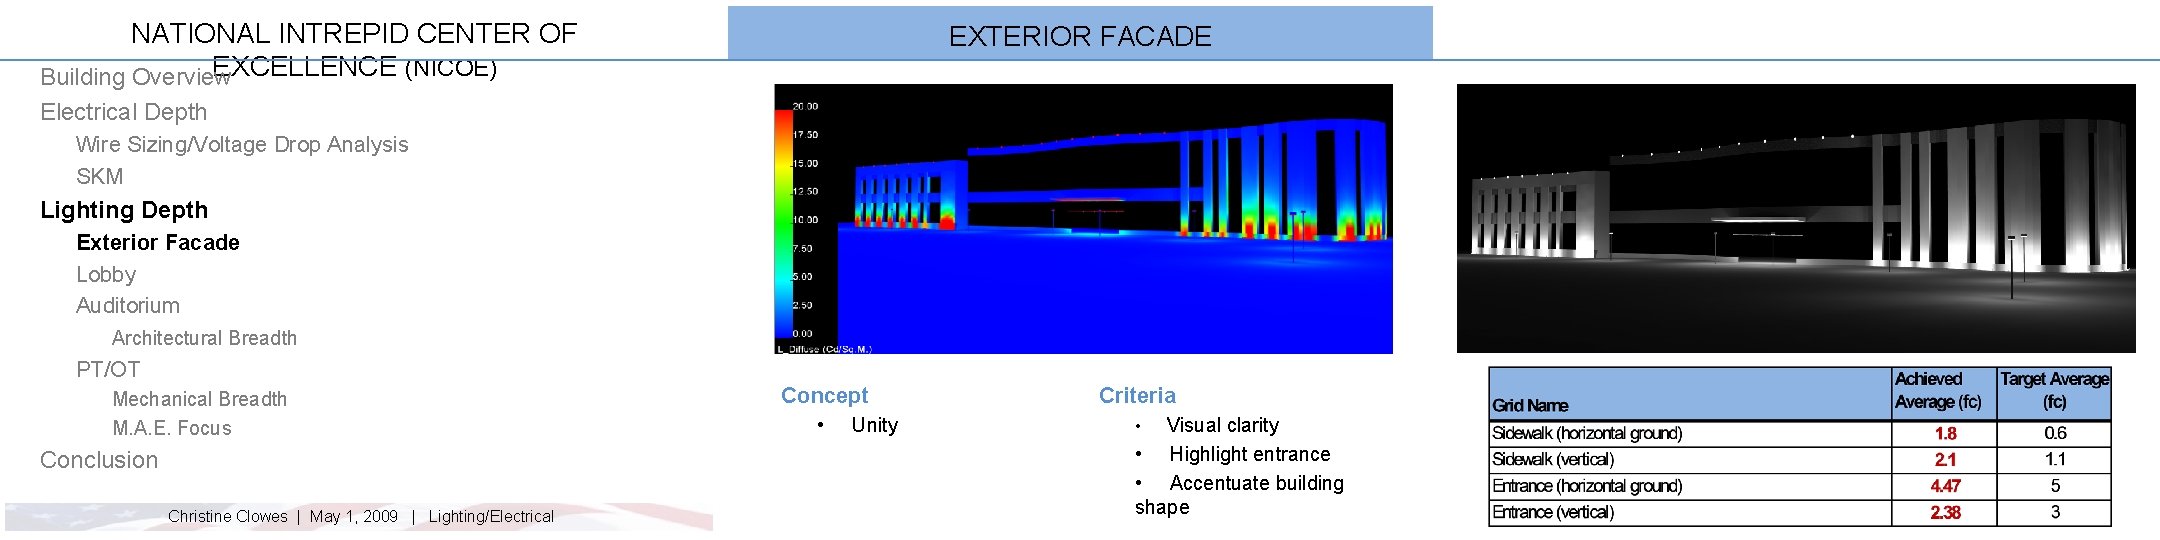 NATIONAL INTREPID CENTER OF EXCELLENCE (NICOE) Building Overview EXTERIOR FACADE Electrical Depth Wire Sizing/Voltage